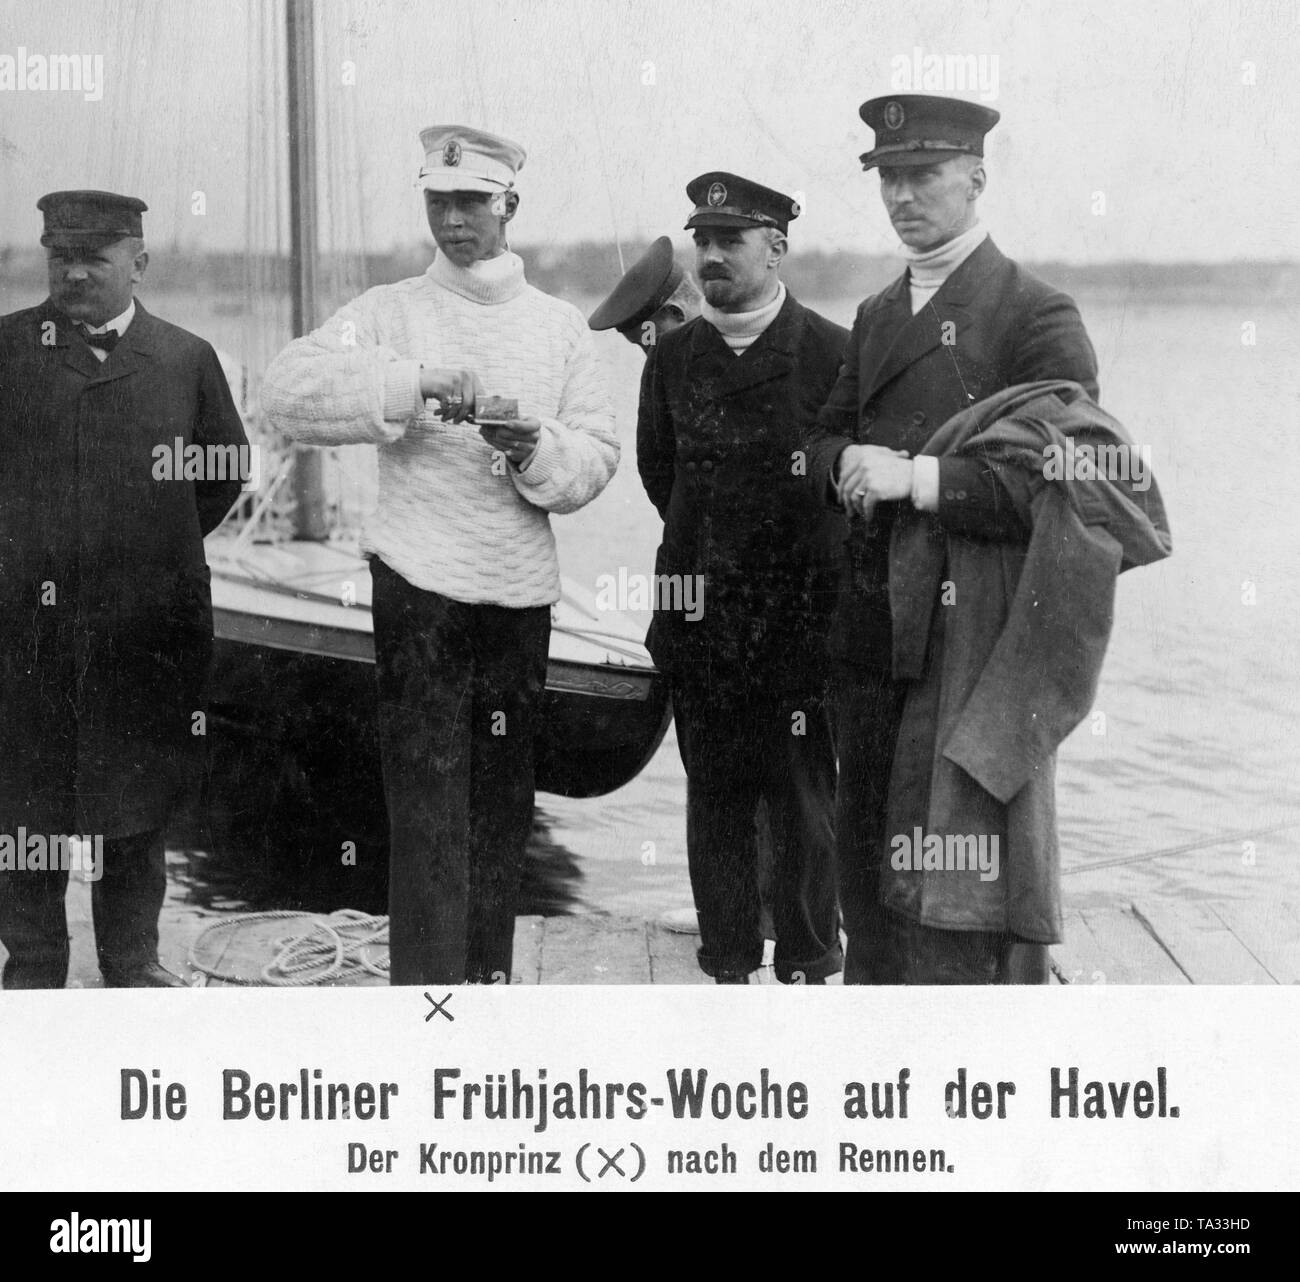 Crown Prince Wilhelm (2nd from left) after a sailing regatta on the Havel. Stock Photo